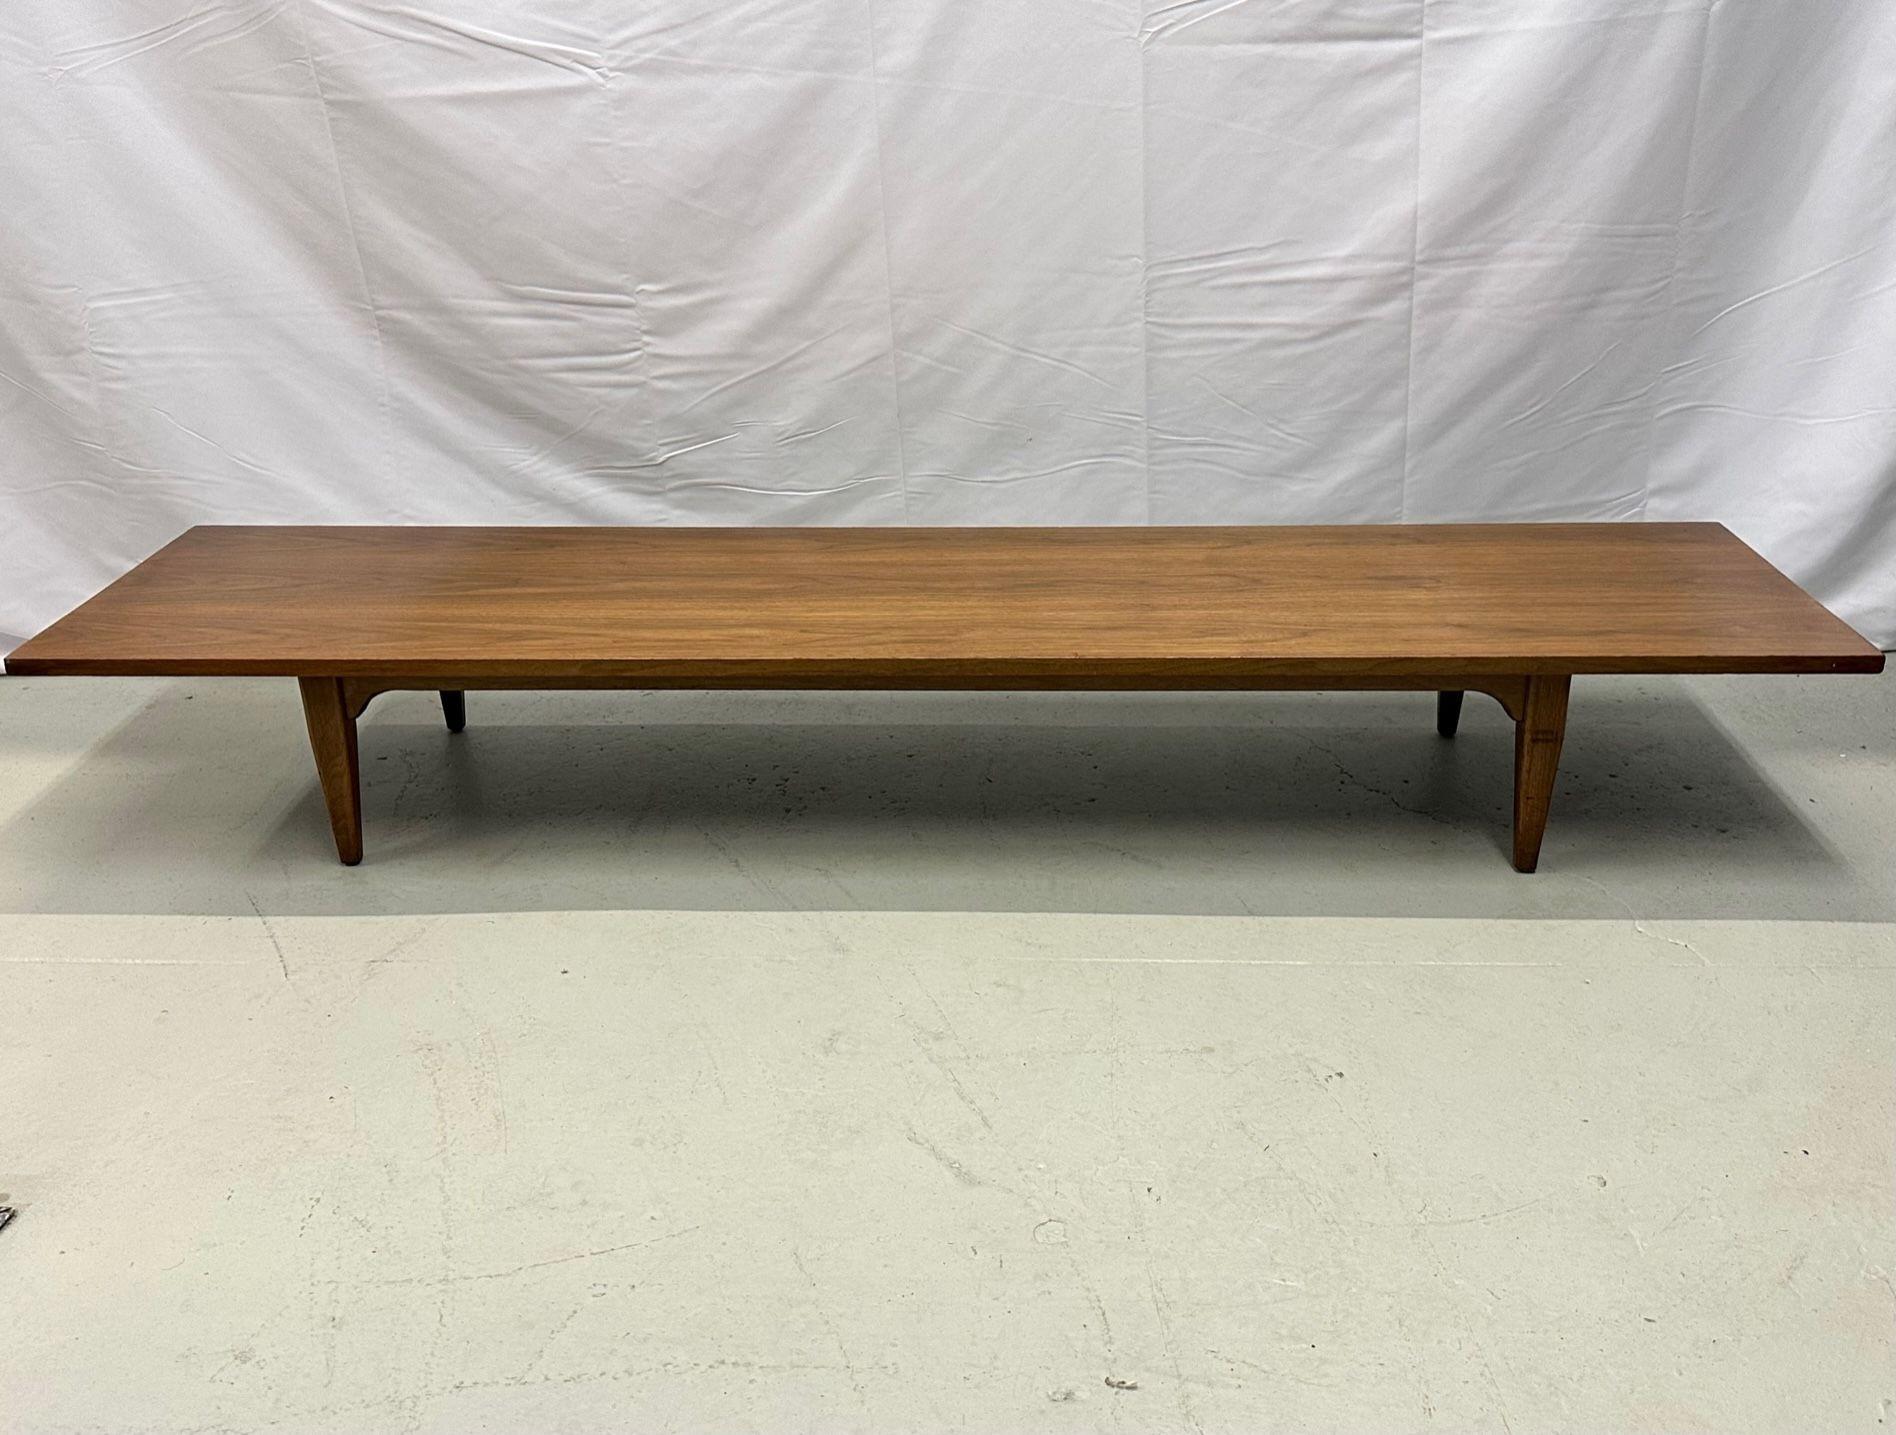 Danish Mid-Century Modern Cocktail or Coffee Table, 1950s, Solid Teak For Sale 1